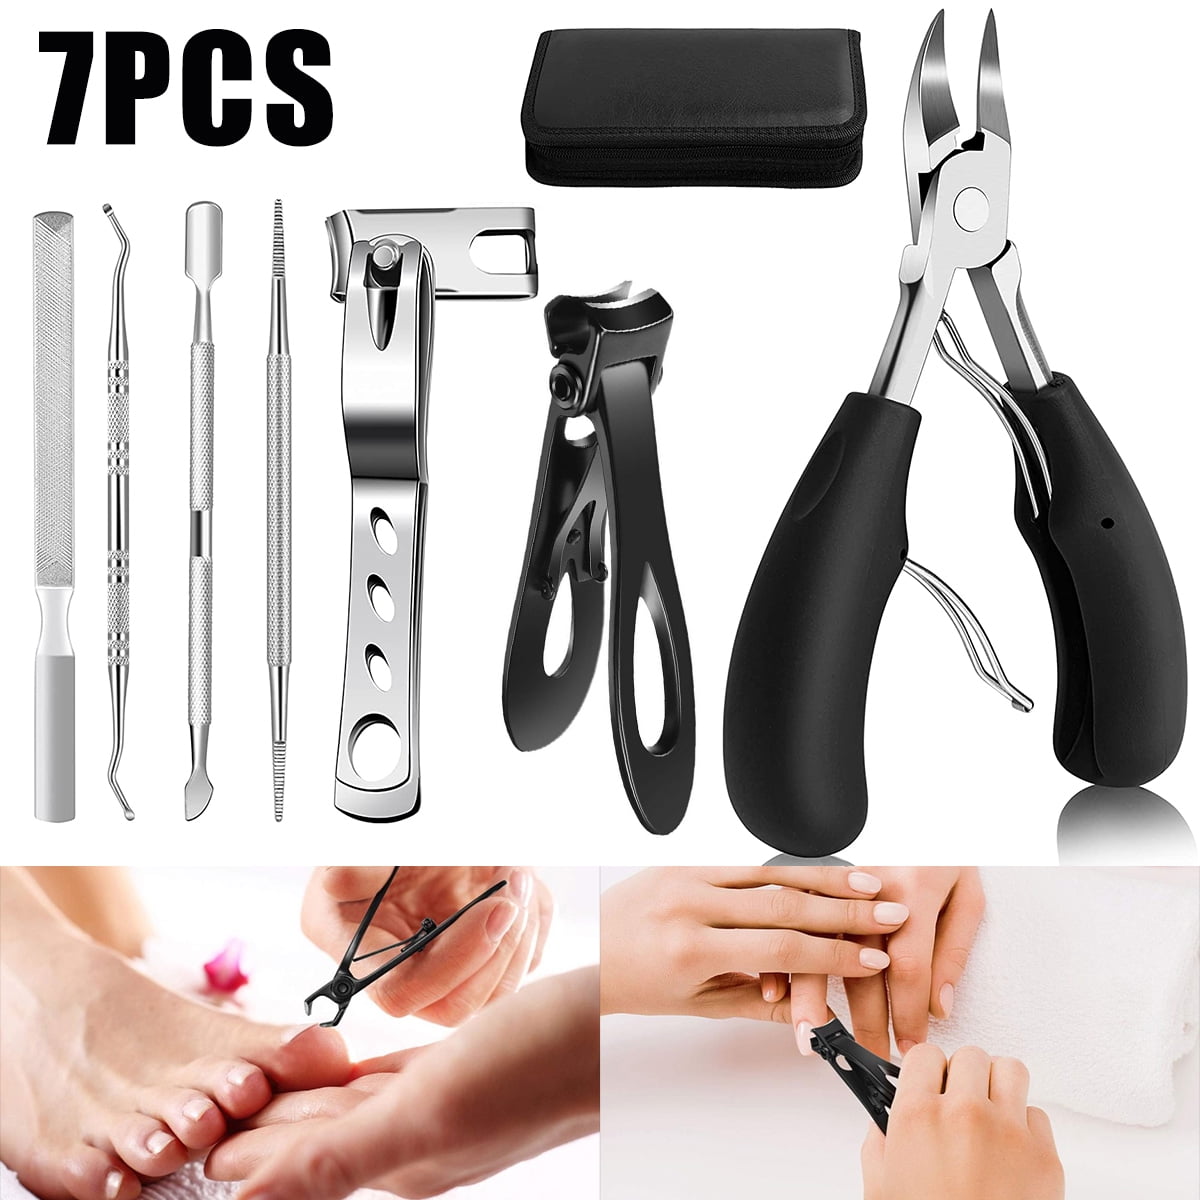 Thick Toenail Clippers, Nail Clippers for Thick & Ingrown Toenails Heavy  Duty Professional Podiatrist Toenail Clippers 